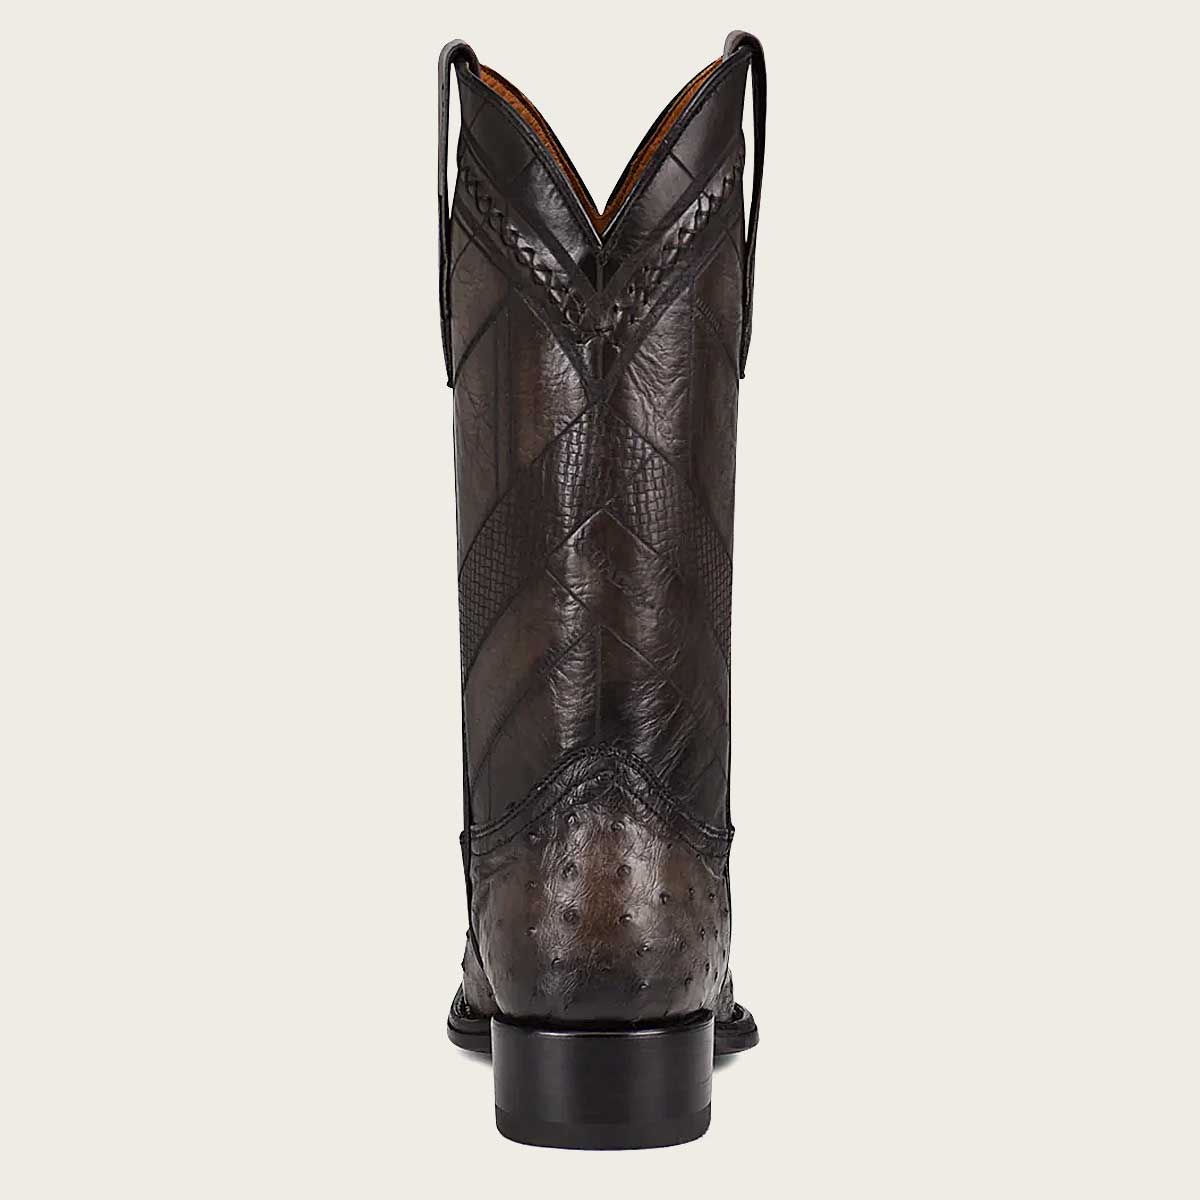 Stylish grey boot crafted from exotic leather with intricate engravings for a unique touch.